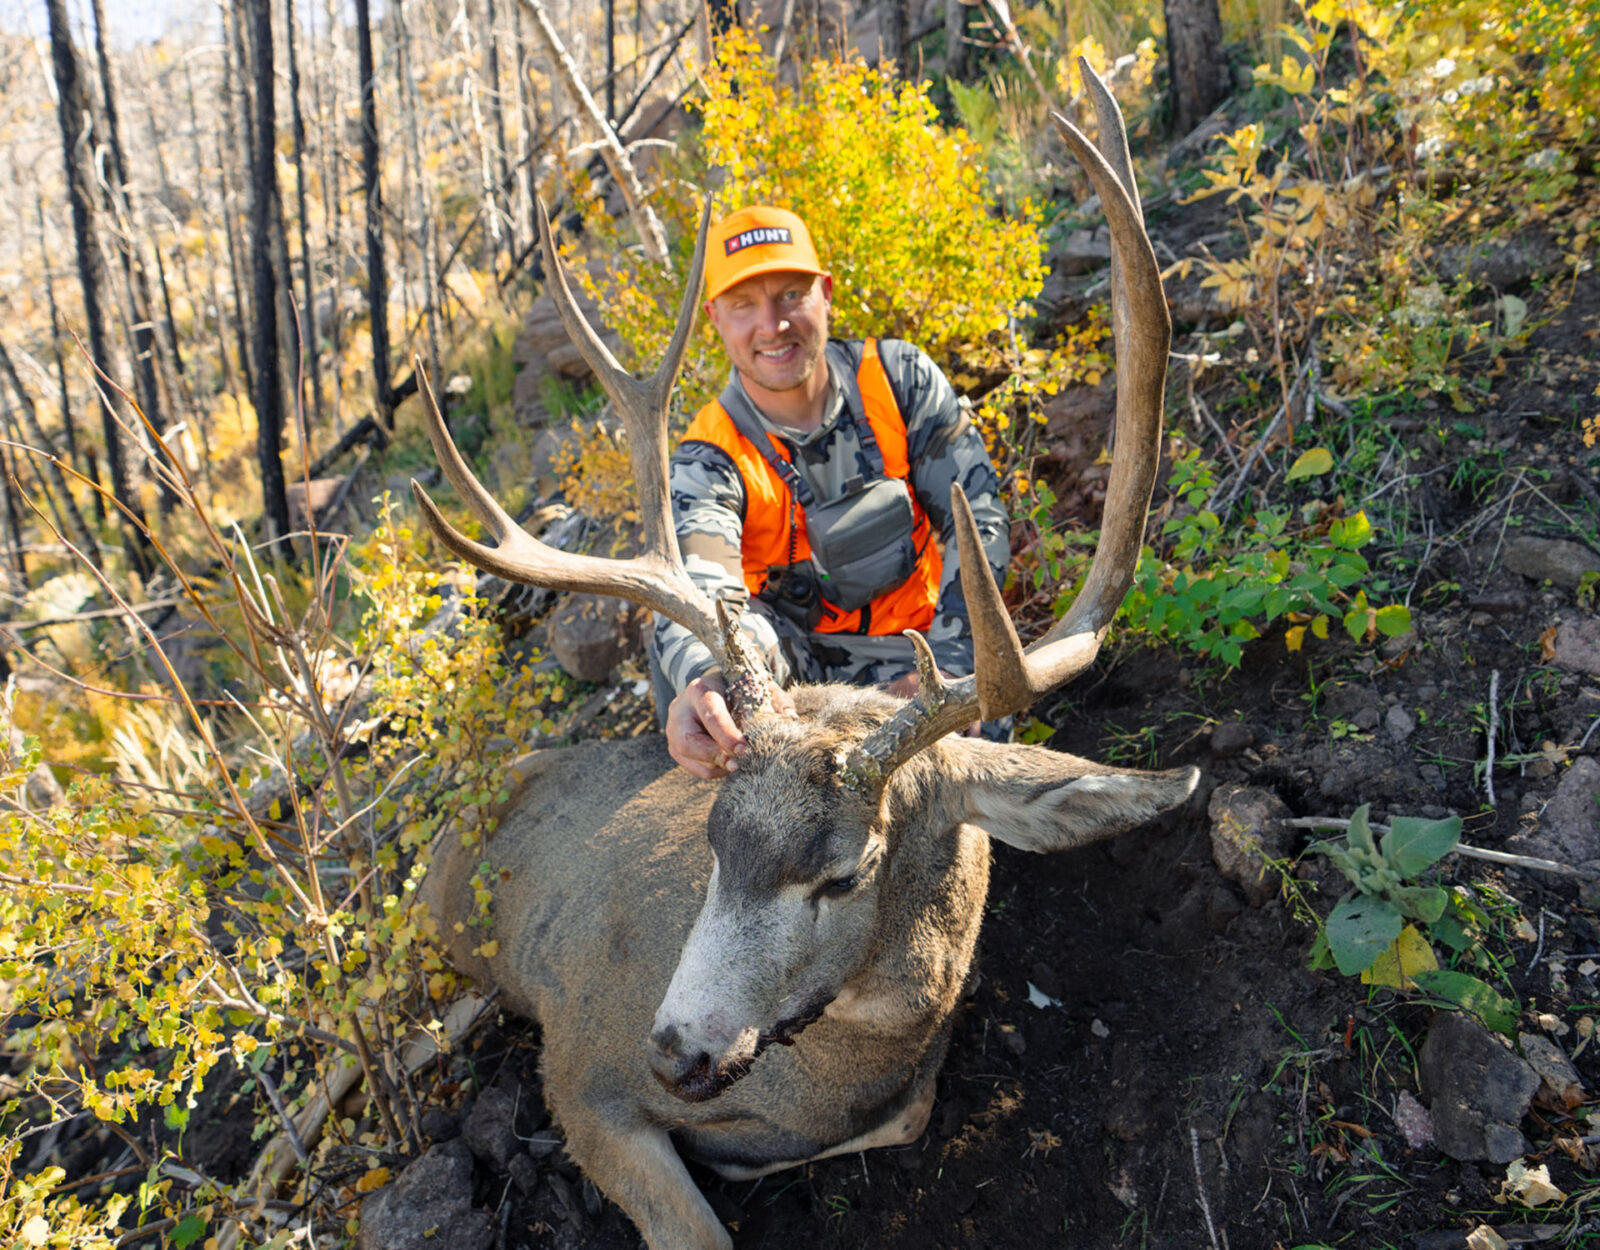 A hunter poses with the mule deer buck he harvested.